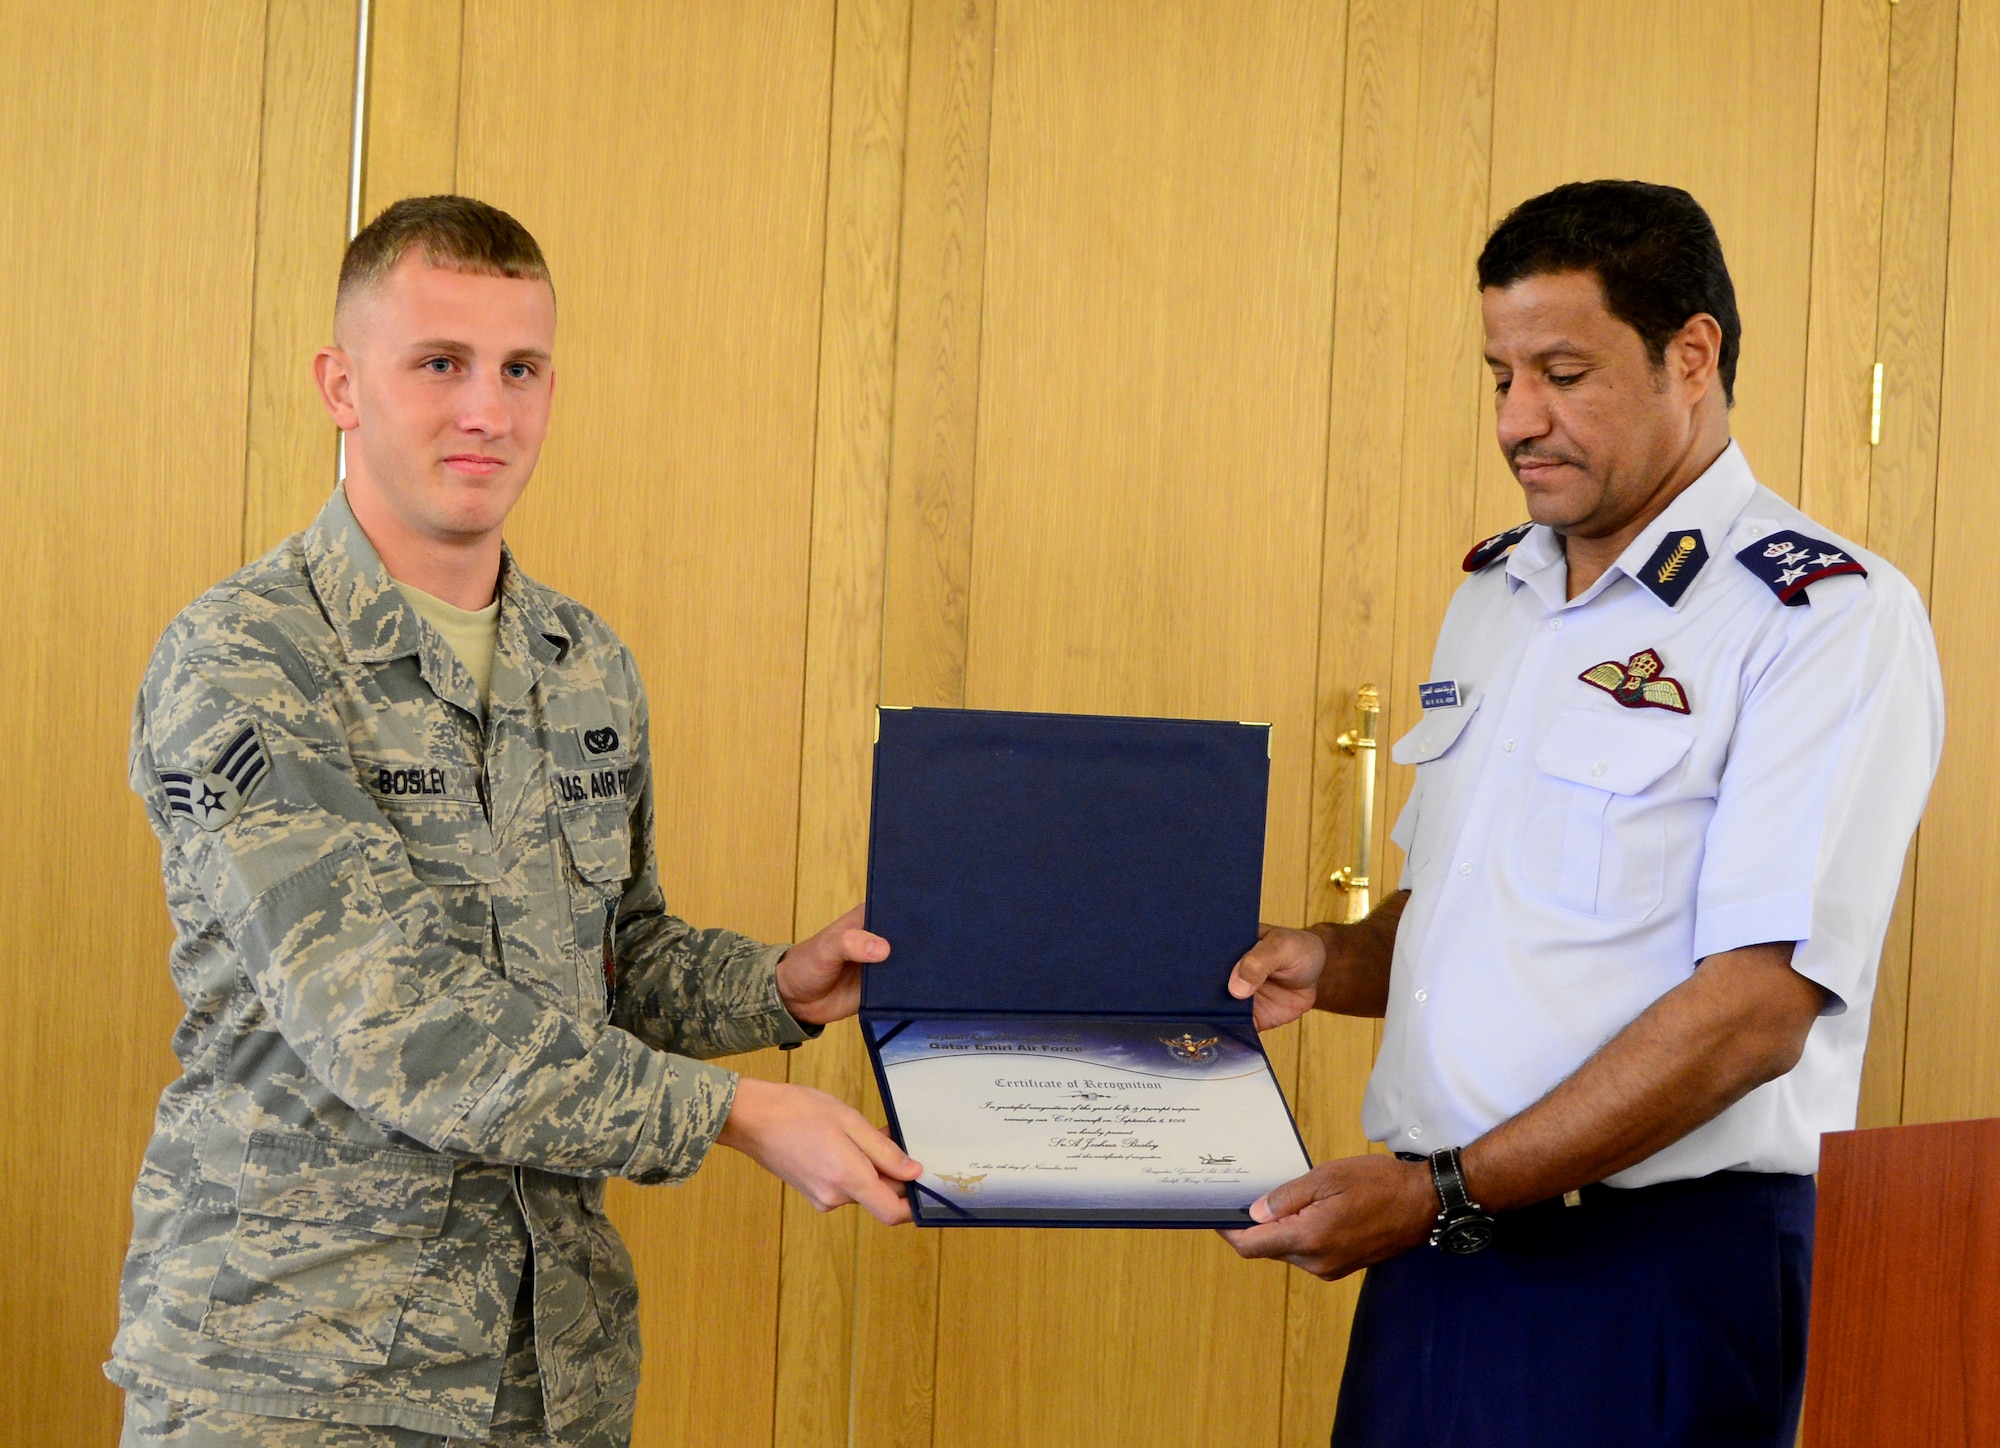 Brig. Gen. 'Ali Bayyat Al-'Asiri, Al Udeid Air Base commander/OC Transportation Wing presents U.S. Air Force Senior Airman Joshua Bosley, 379th Expeditionary Civil Engineer Squadron firefighter, with a certificate of appreciation during the Qatar Emiri Air Force’s Air Lift Wing’s C-17 5th year anniversary ceremony Nov. 7, 2014, at Al Udeid Air Base, Qatar. Bosley and his other fellow firefighters were presented with these certificates for their help in putting out a fire on a C-17 Sept. 6, here. (U.S. Air Force photo by Senior Airman Kia Atkins)